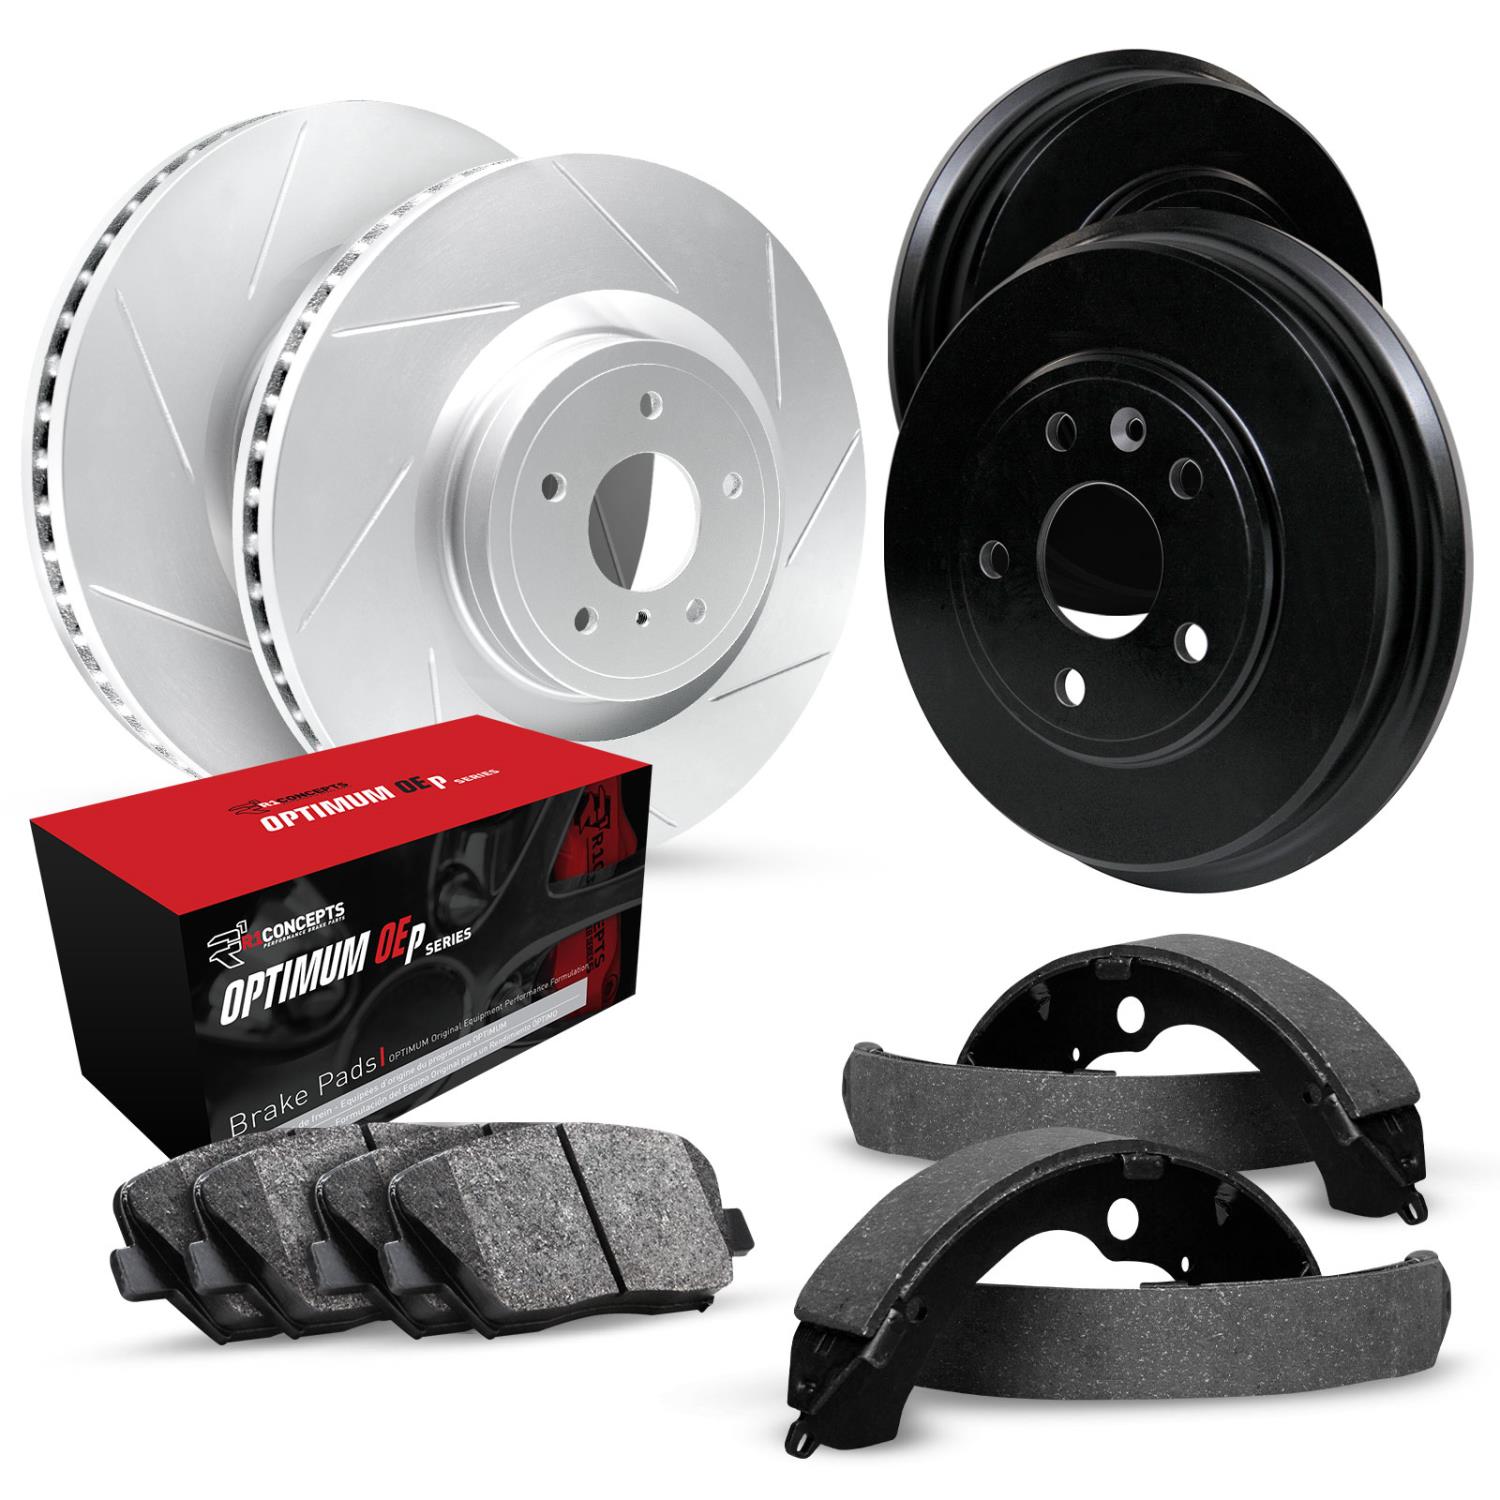 GEO-Carbon Slotted Brake Rotor & Drum Set w/Optimum OE Pads & Shoes, 1971-1971 GM, Position: Front & Rear